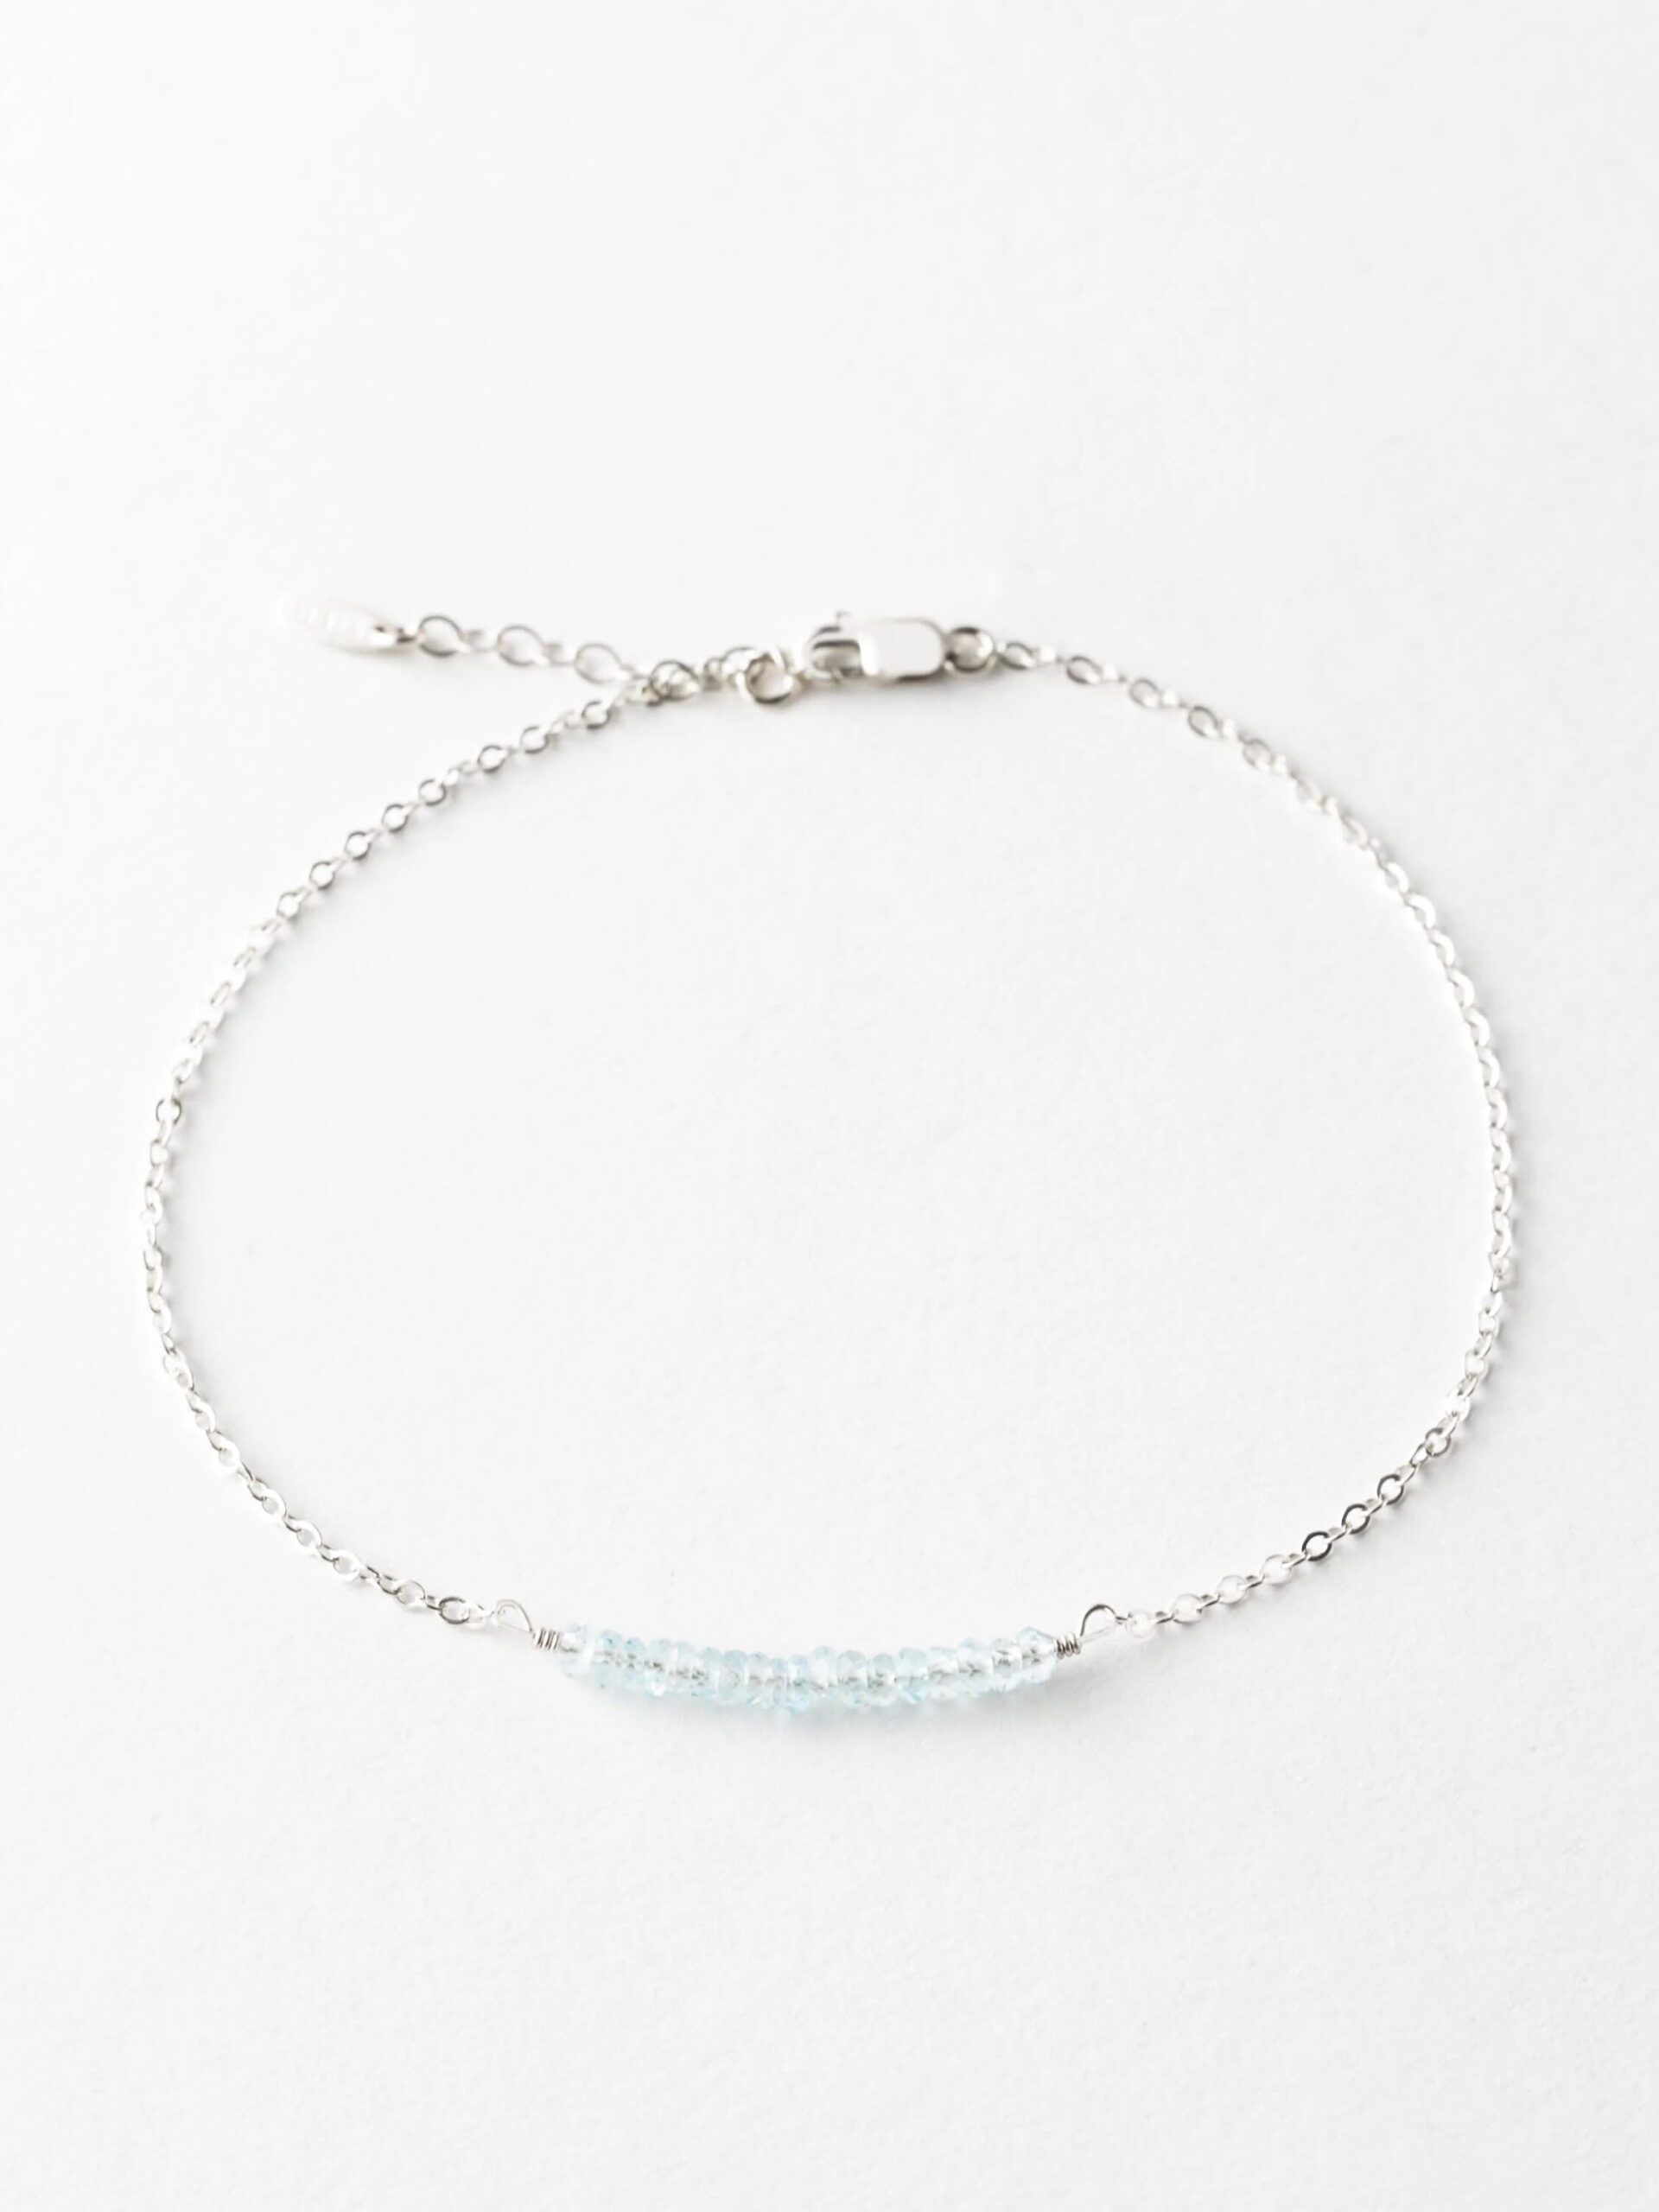 Silver chain bracelet with a central section of blue beads on a white background.